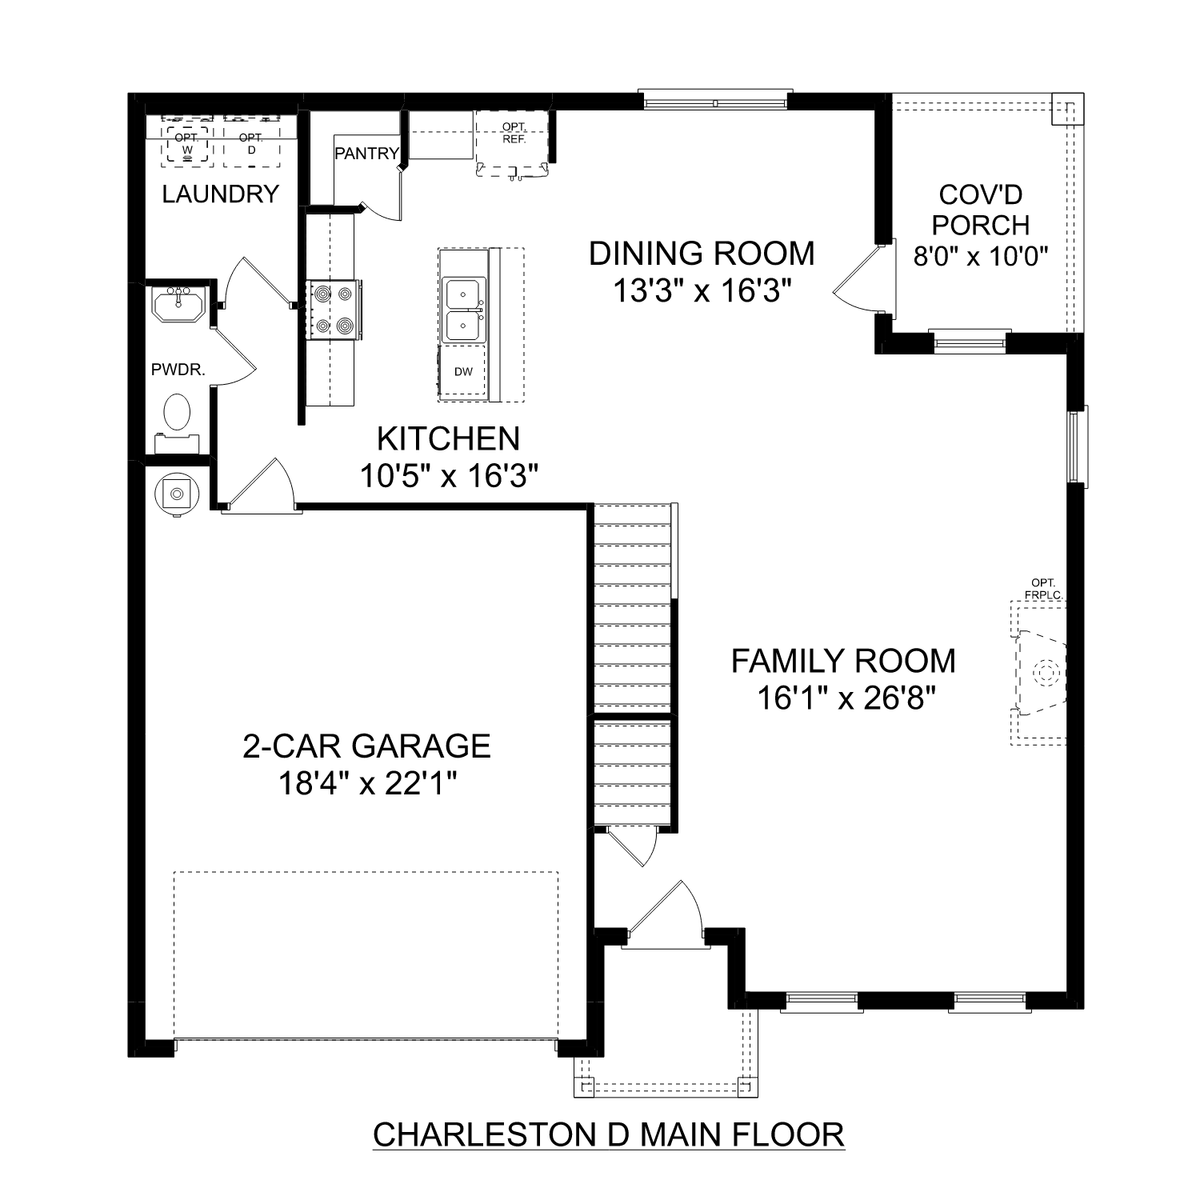 1 - The Charleston D buildable floor plan layout in Davidson Homes' Walker's Hill community.